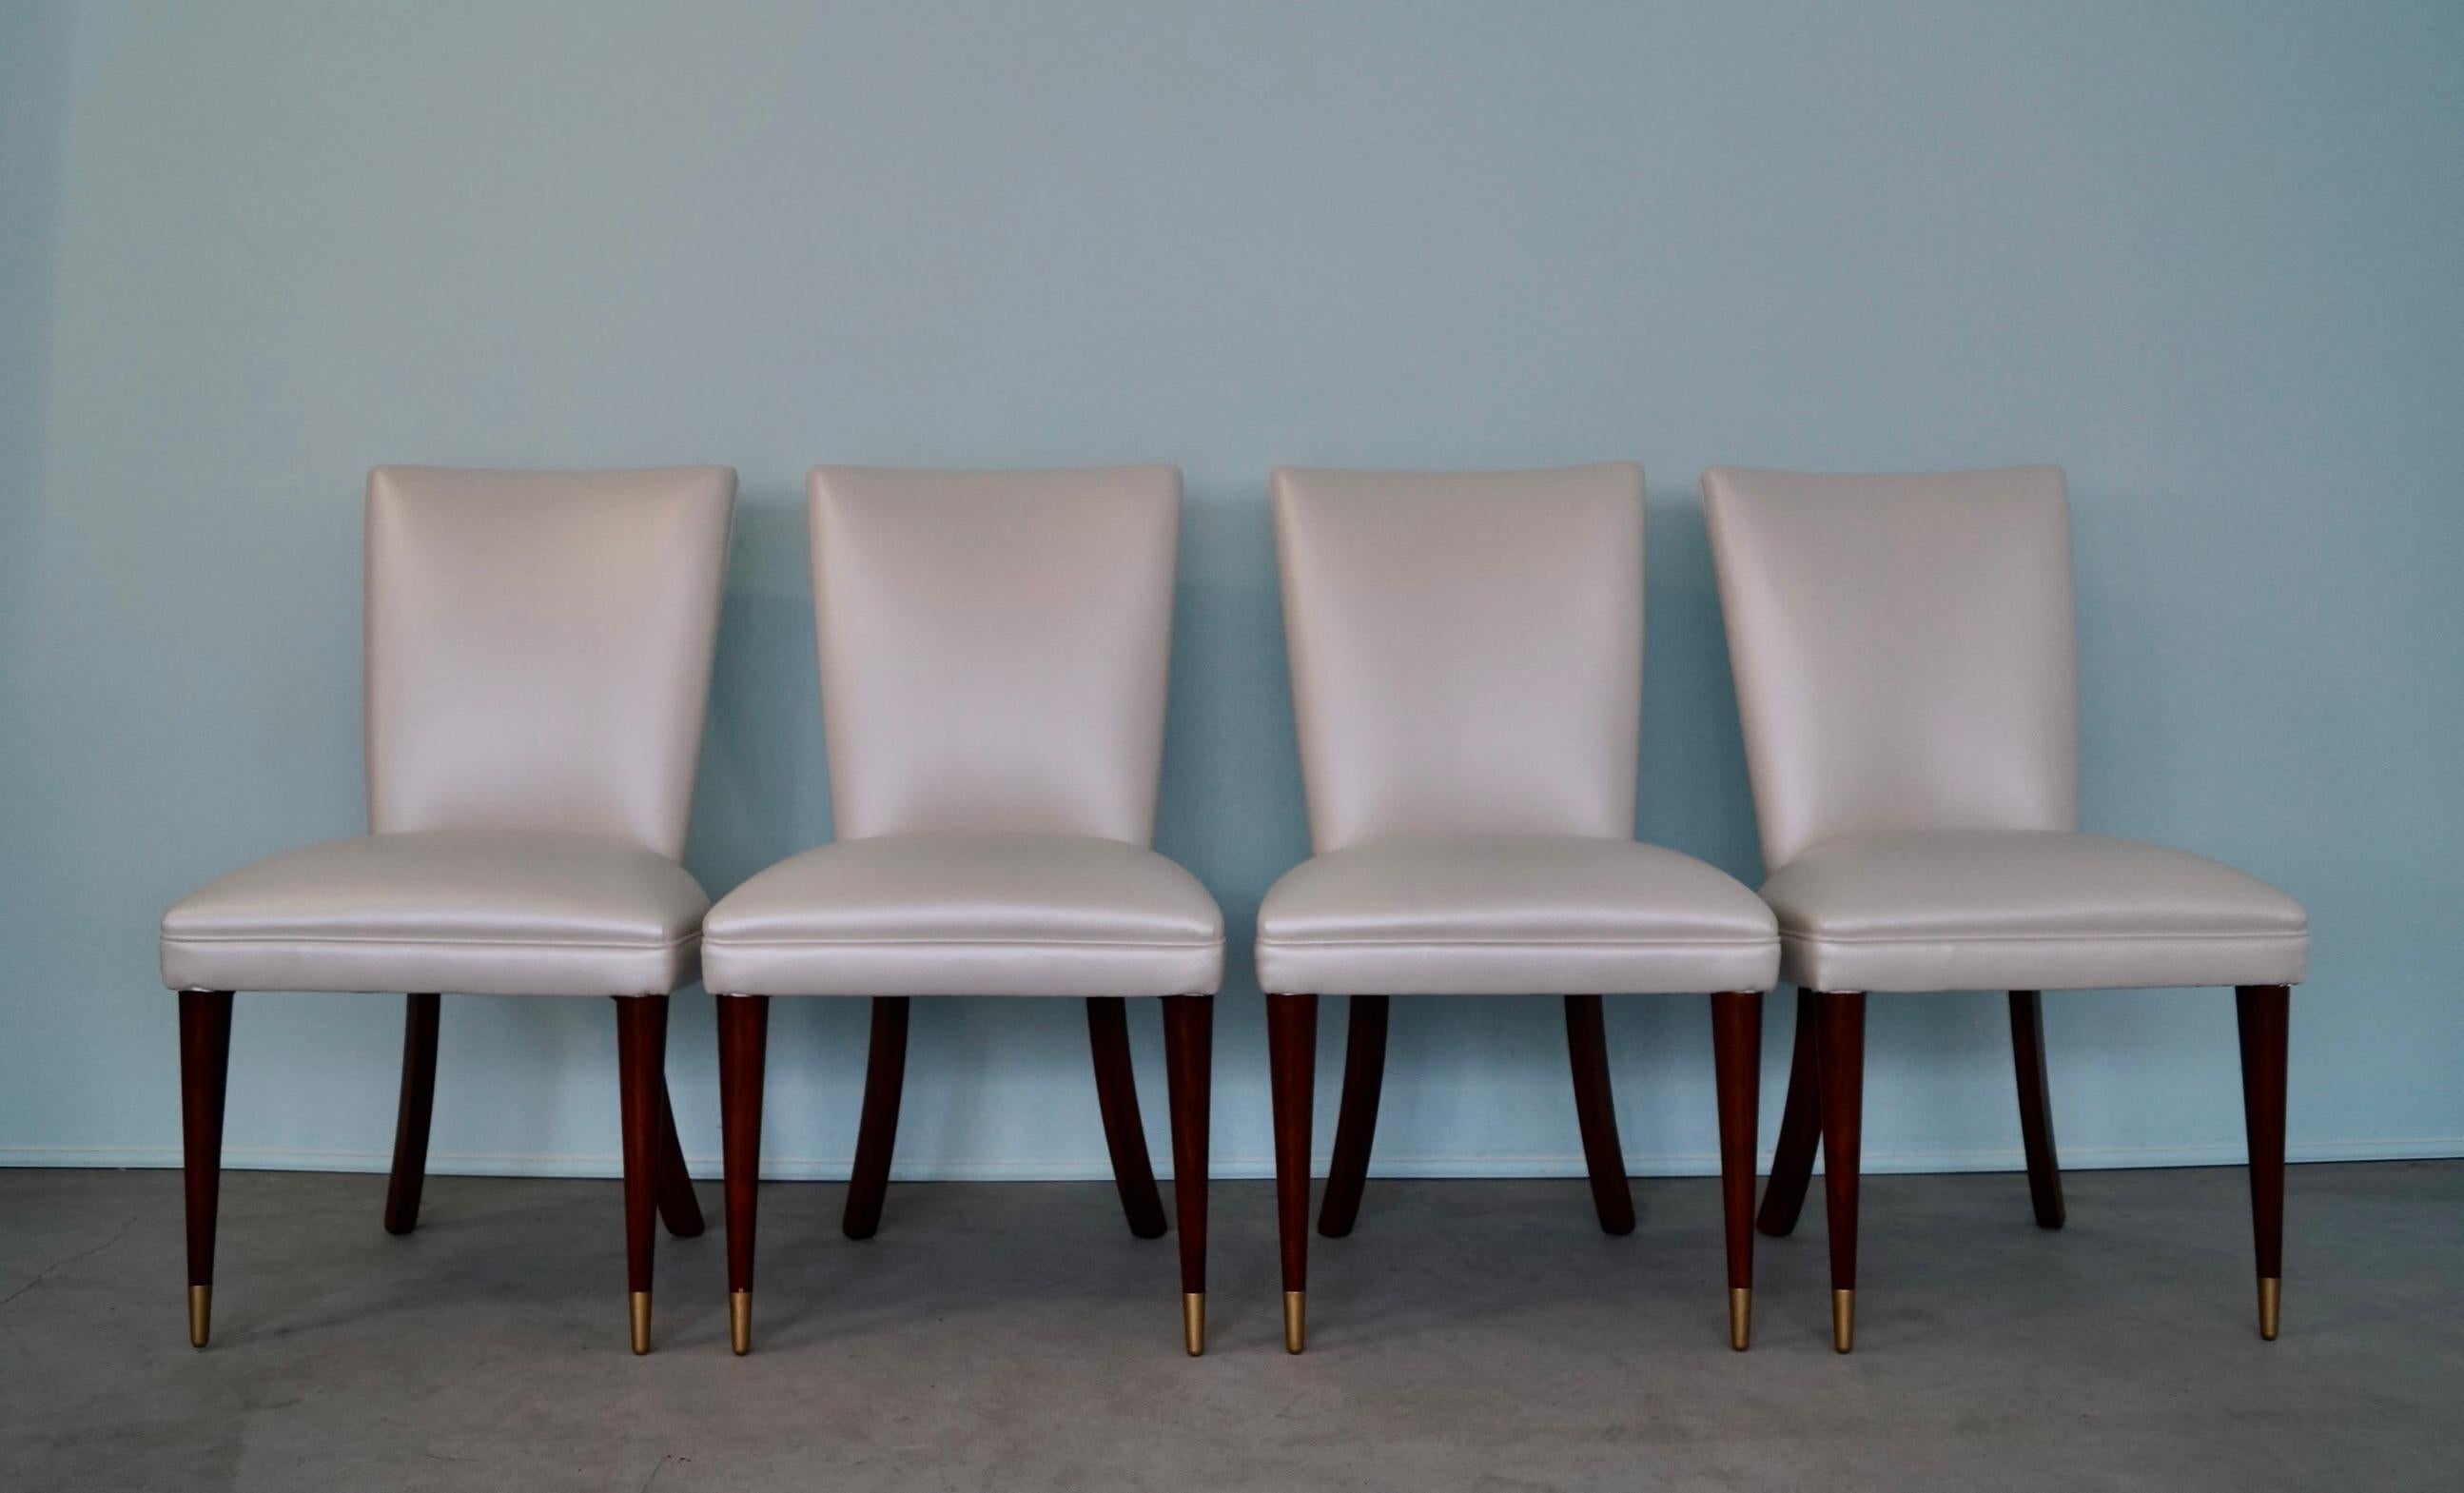 Mid-20th Century 1950's Mid-Century Modern Hollywood Regency Dining Chairs - Set of 4 For Sale